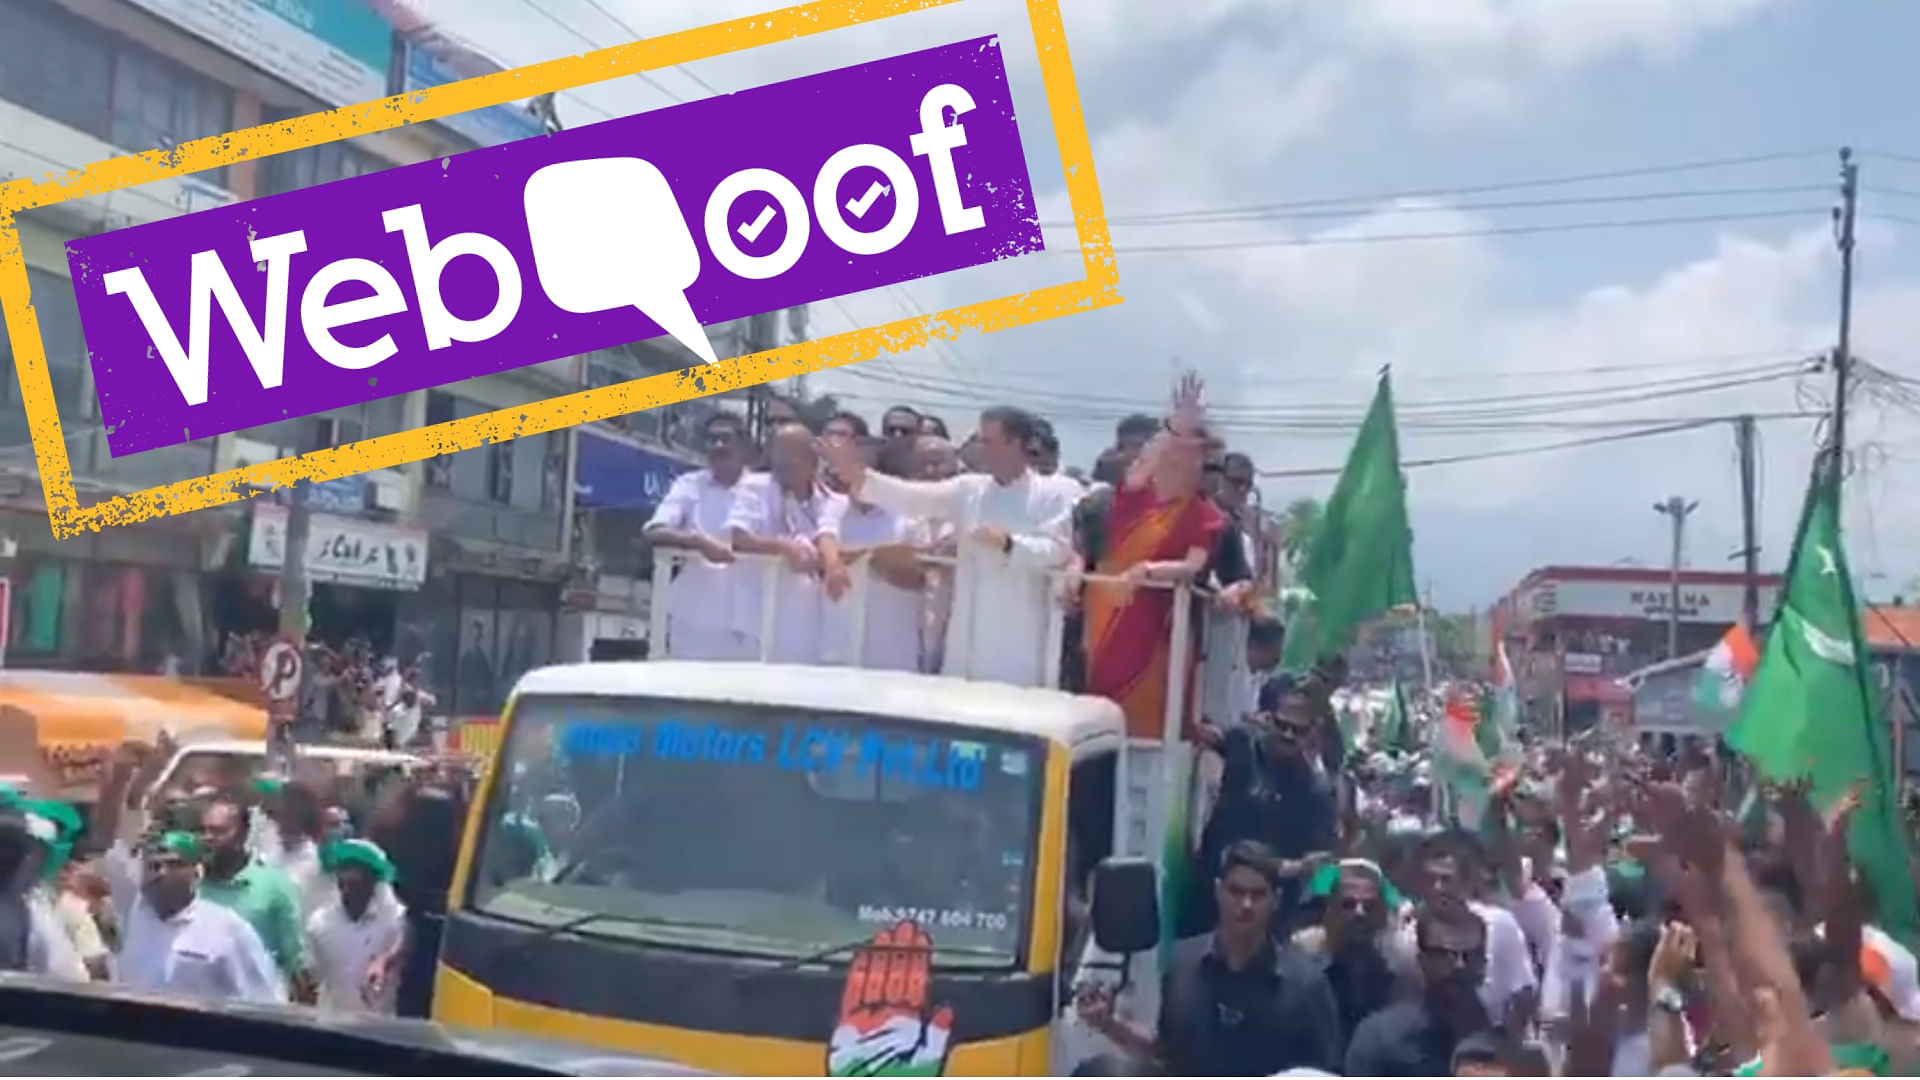 Several social media users shared videos from Rahul Gandhi’s Wayanad roadshow, claiming Pakistani flags were raised during the event.